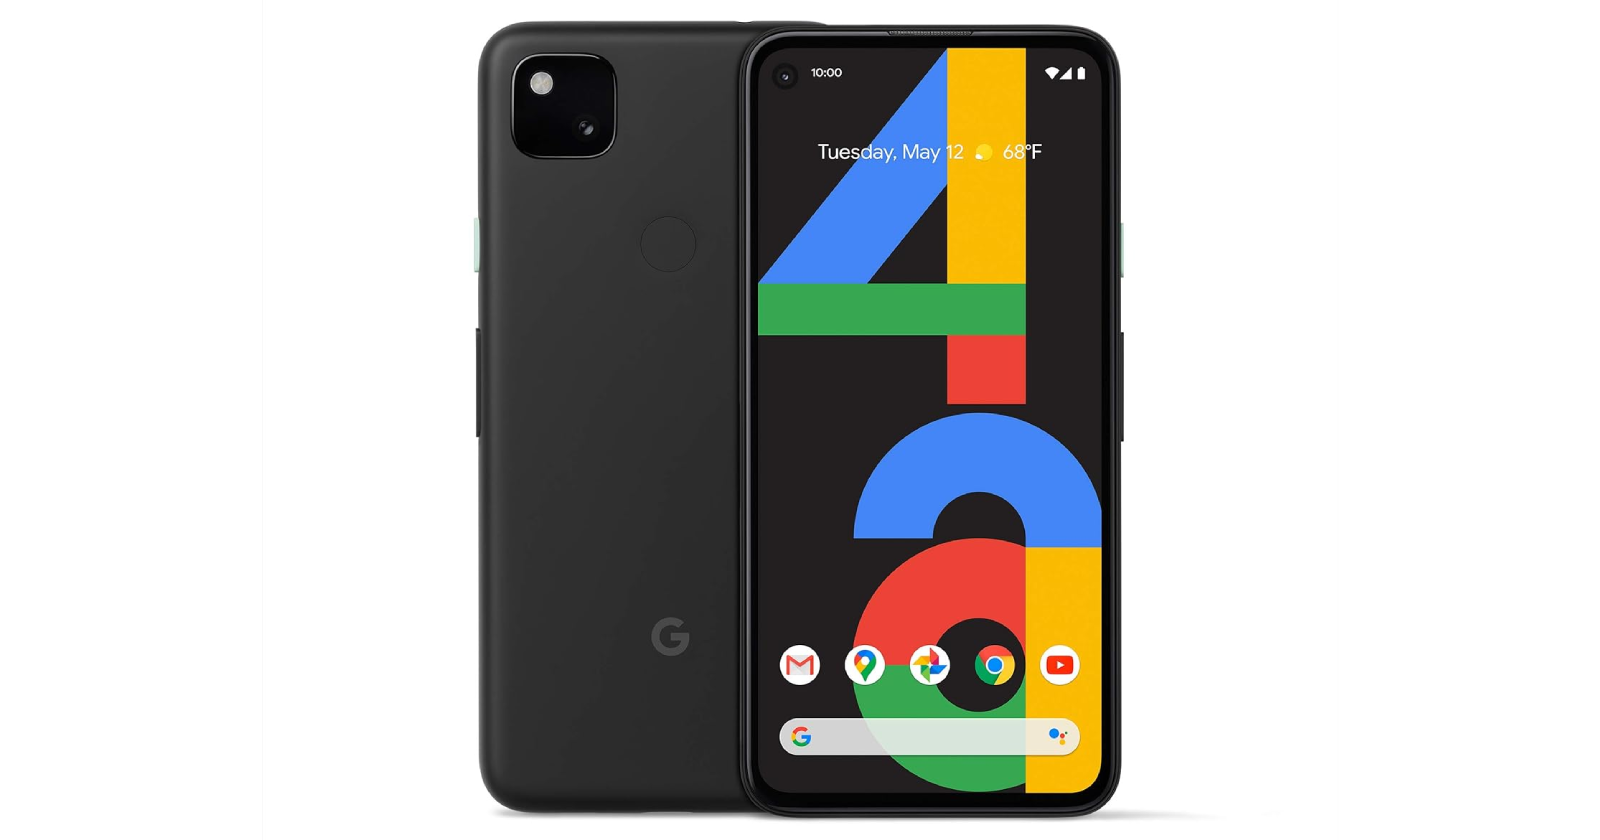 The Google Pixel 4a has reportedly bagged a surprise update